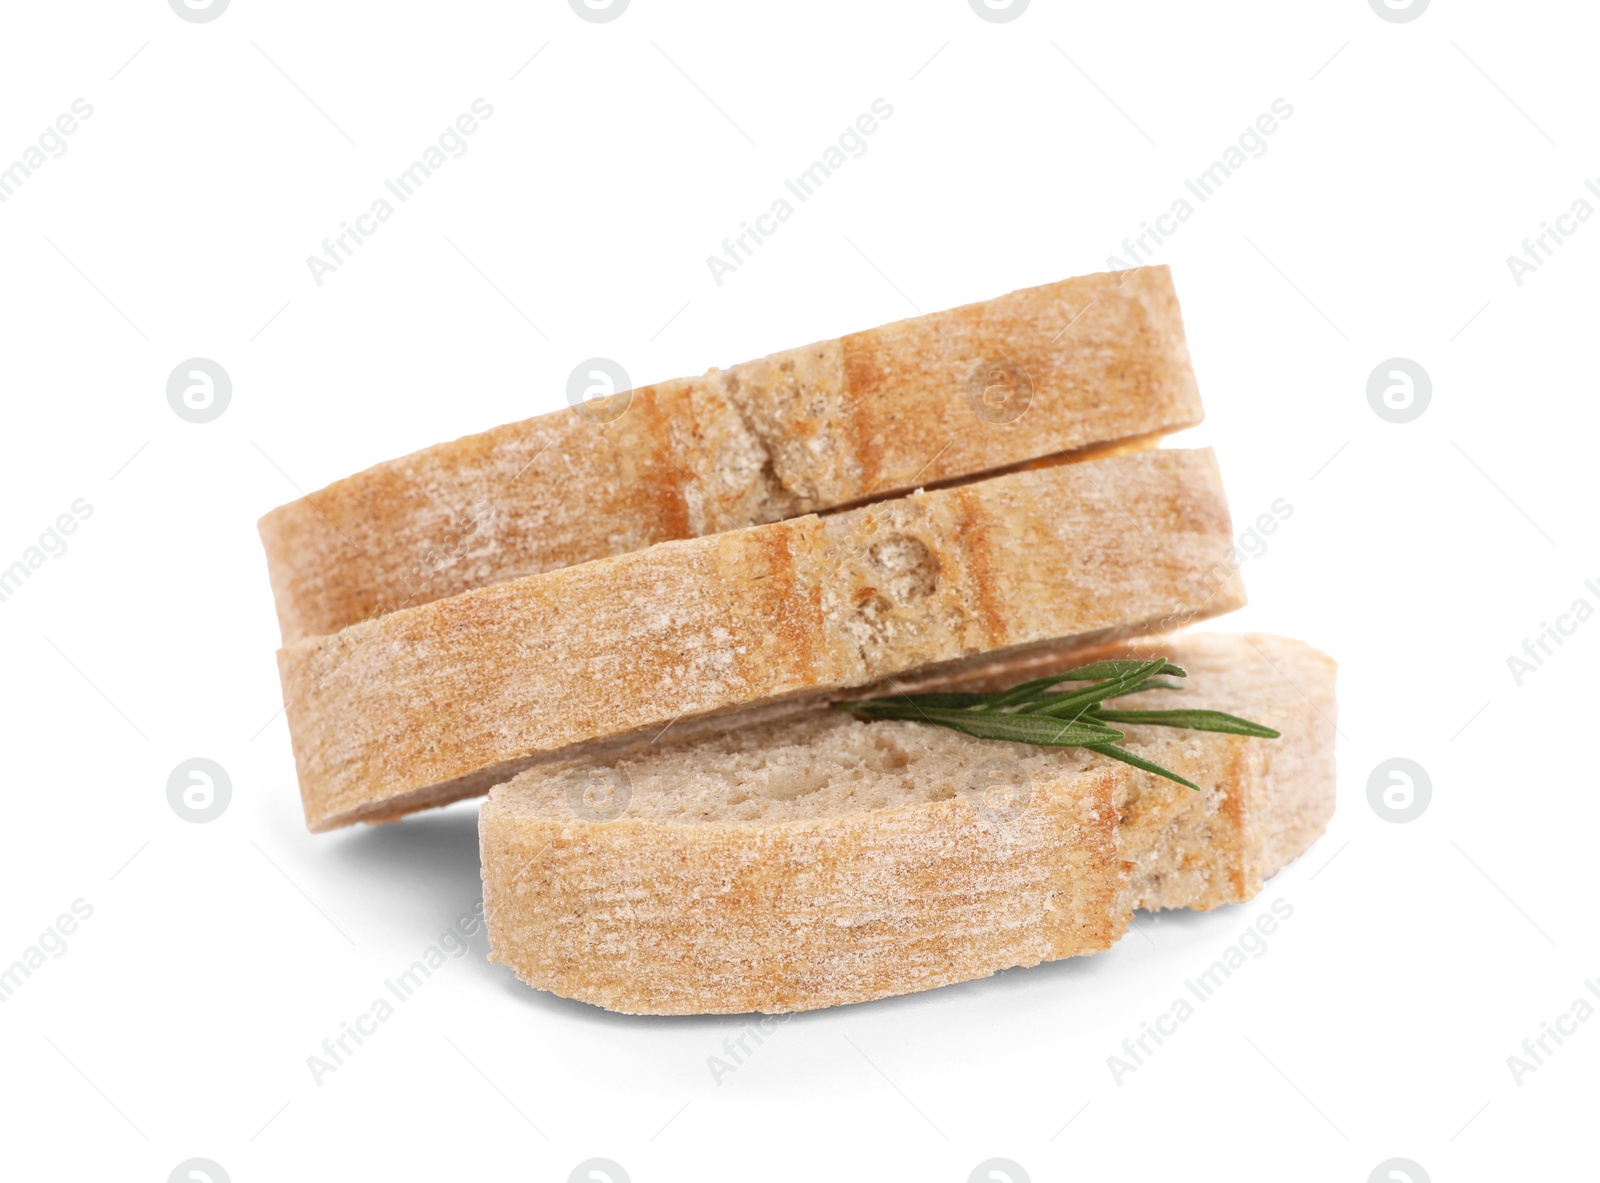 Photo of Cut ciabatta with rosemary on white background. Fresh bread